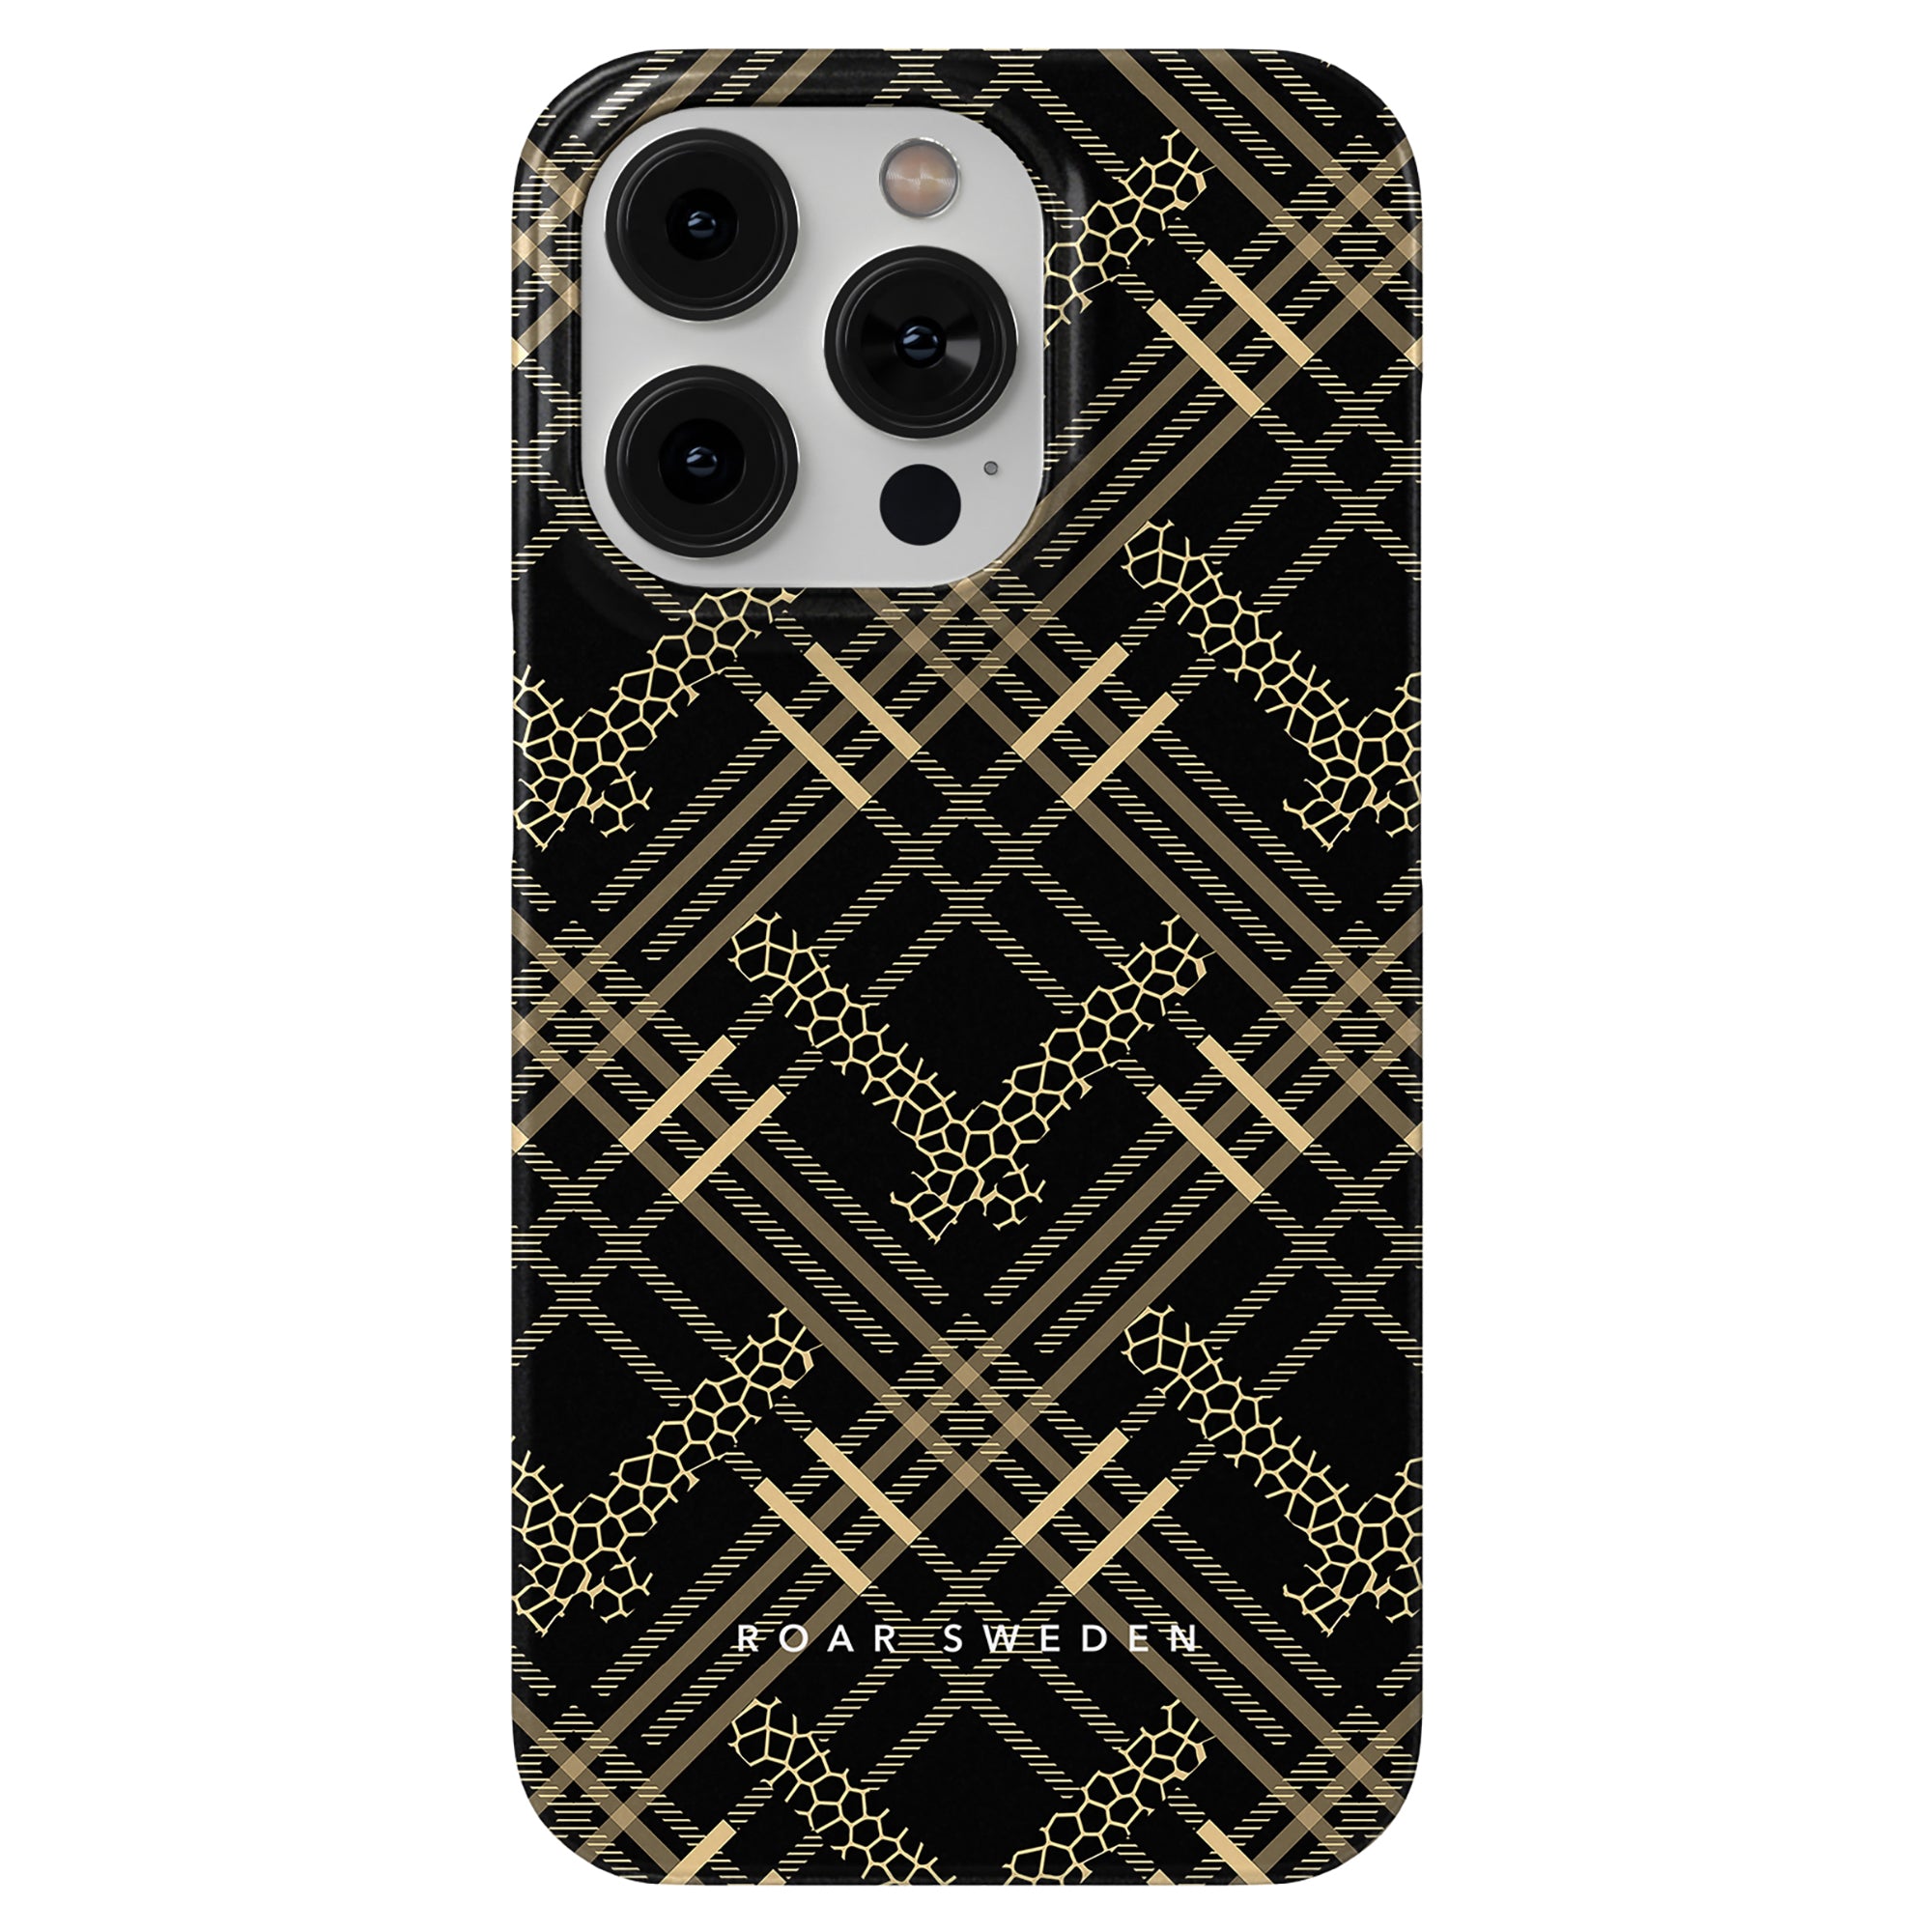 A Tartan Leo - Slim case, designed by Roar Sweden, is a stylish smartphone case featuring a black and gold color combination with a plaid pattern.